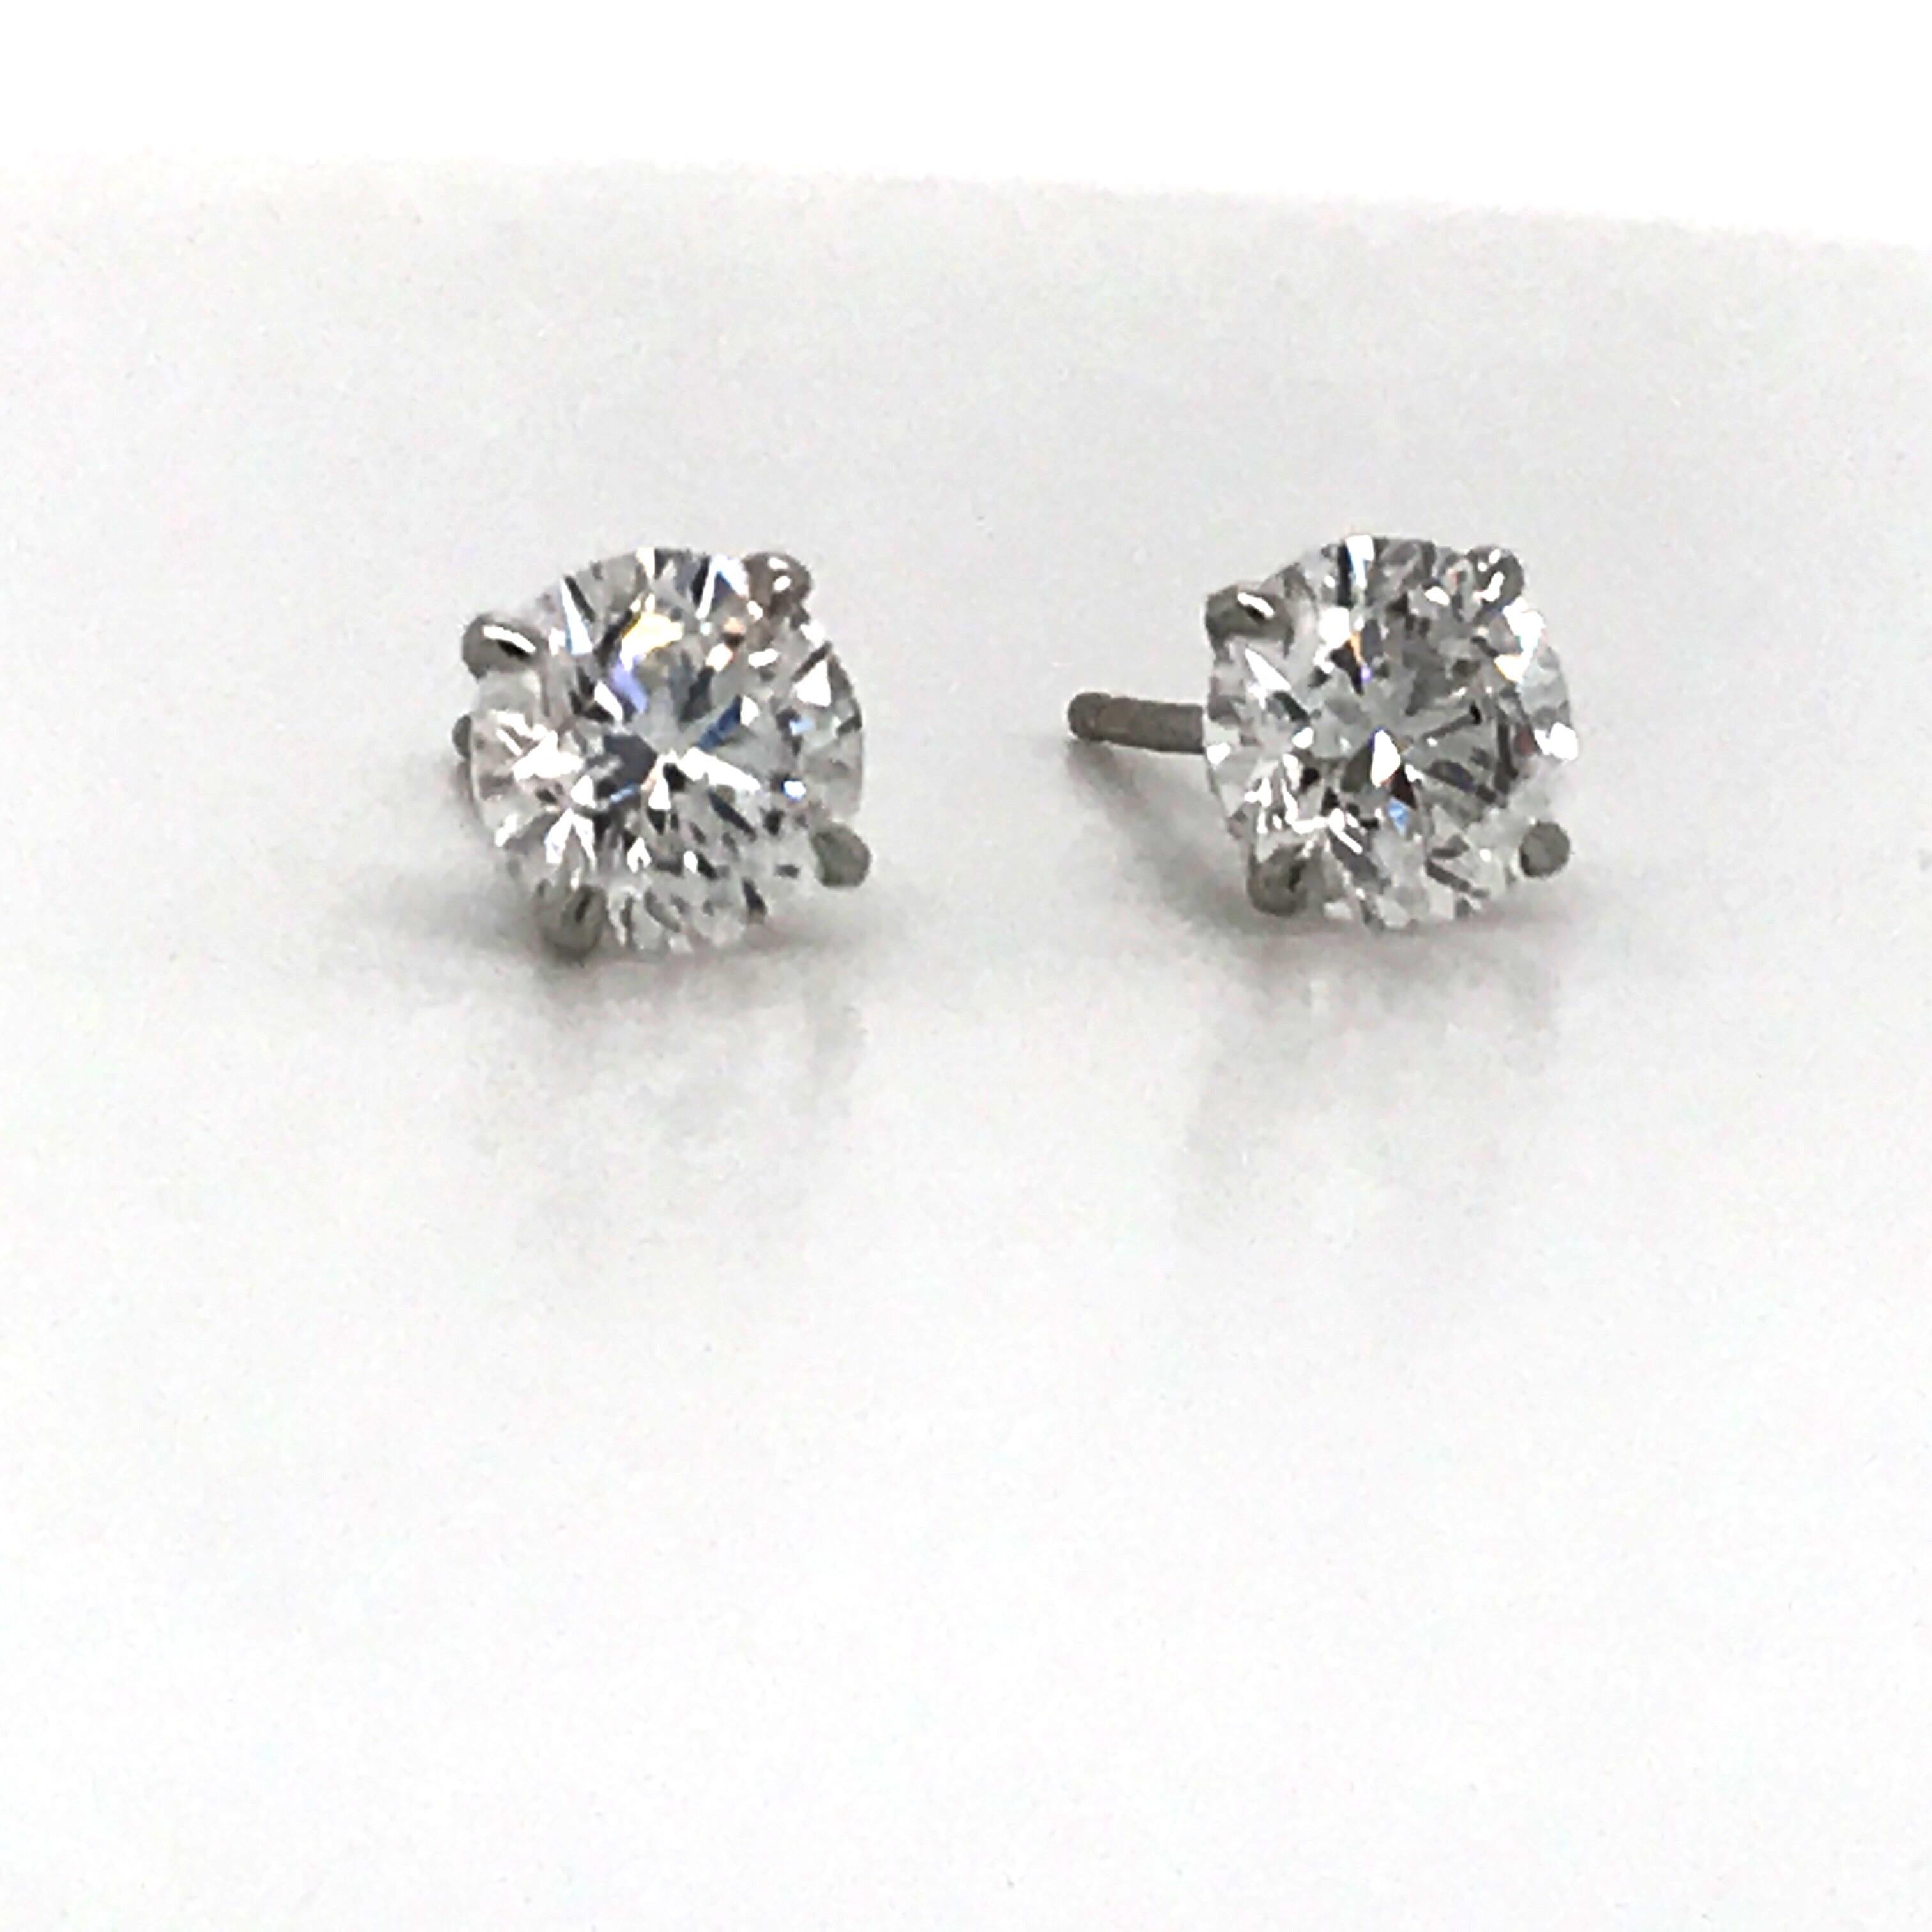 Diamond stud earrings weighing 1.40 carats in a 14k white gold 4 prong martini setting.
Color E-F
Clartiy SI2